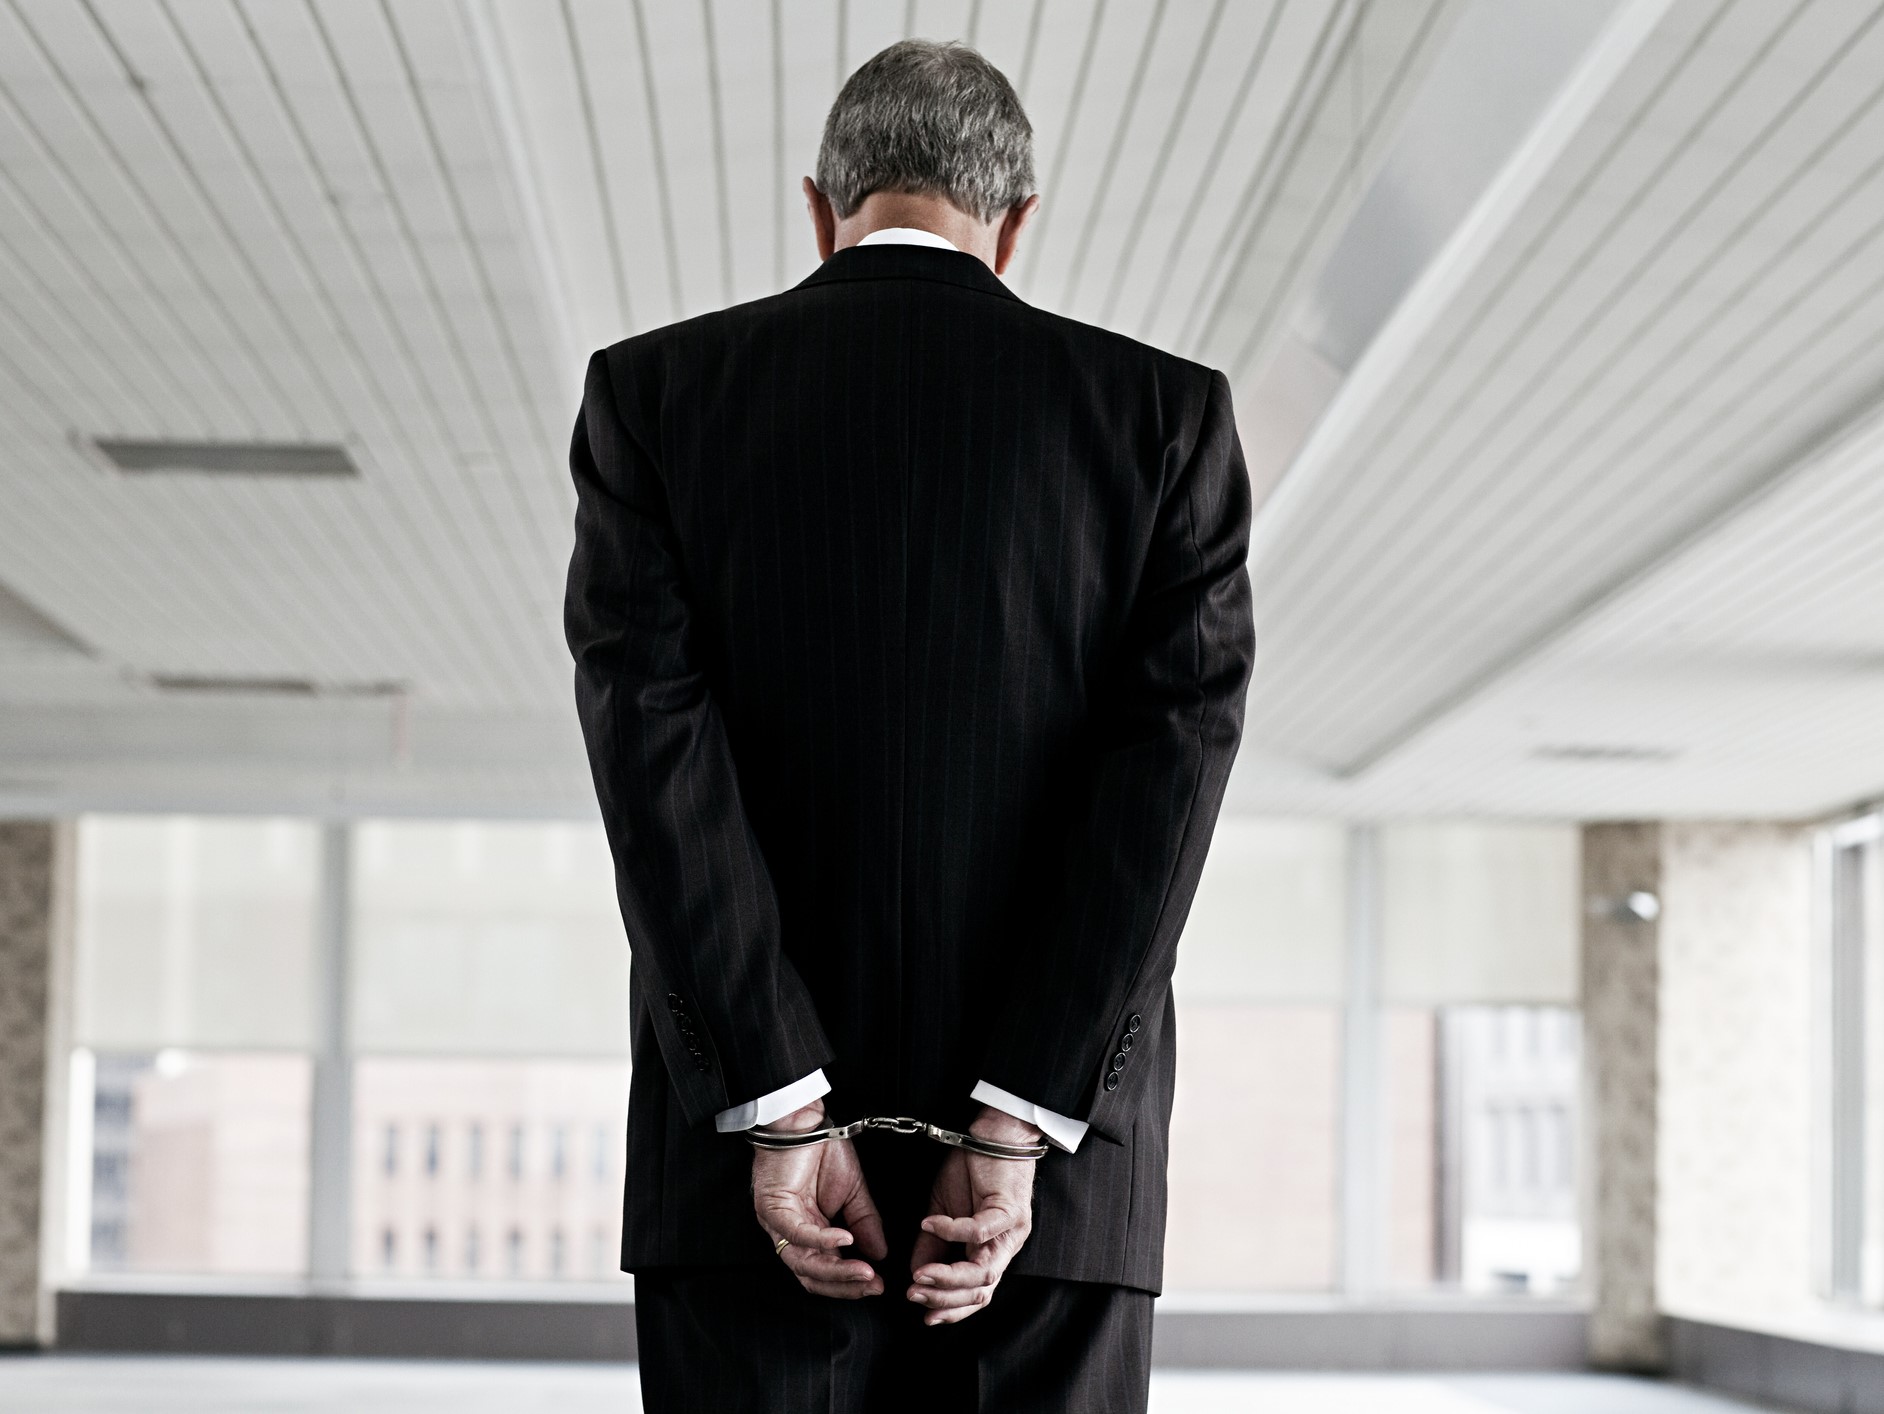 man in business suit with hands cuffed behind back